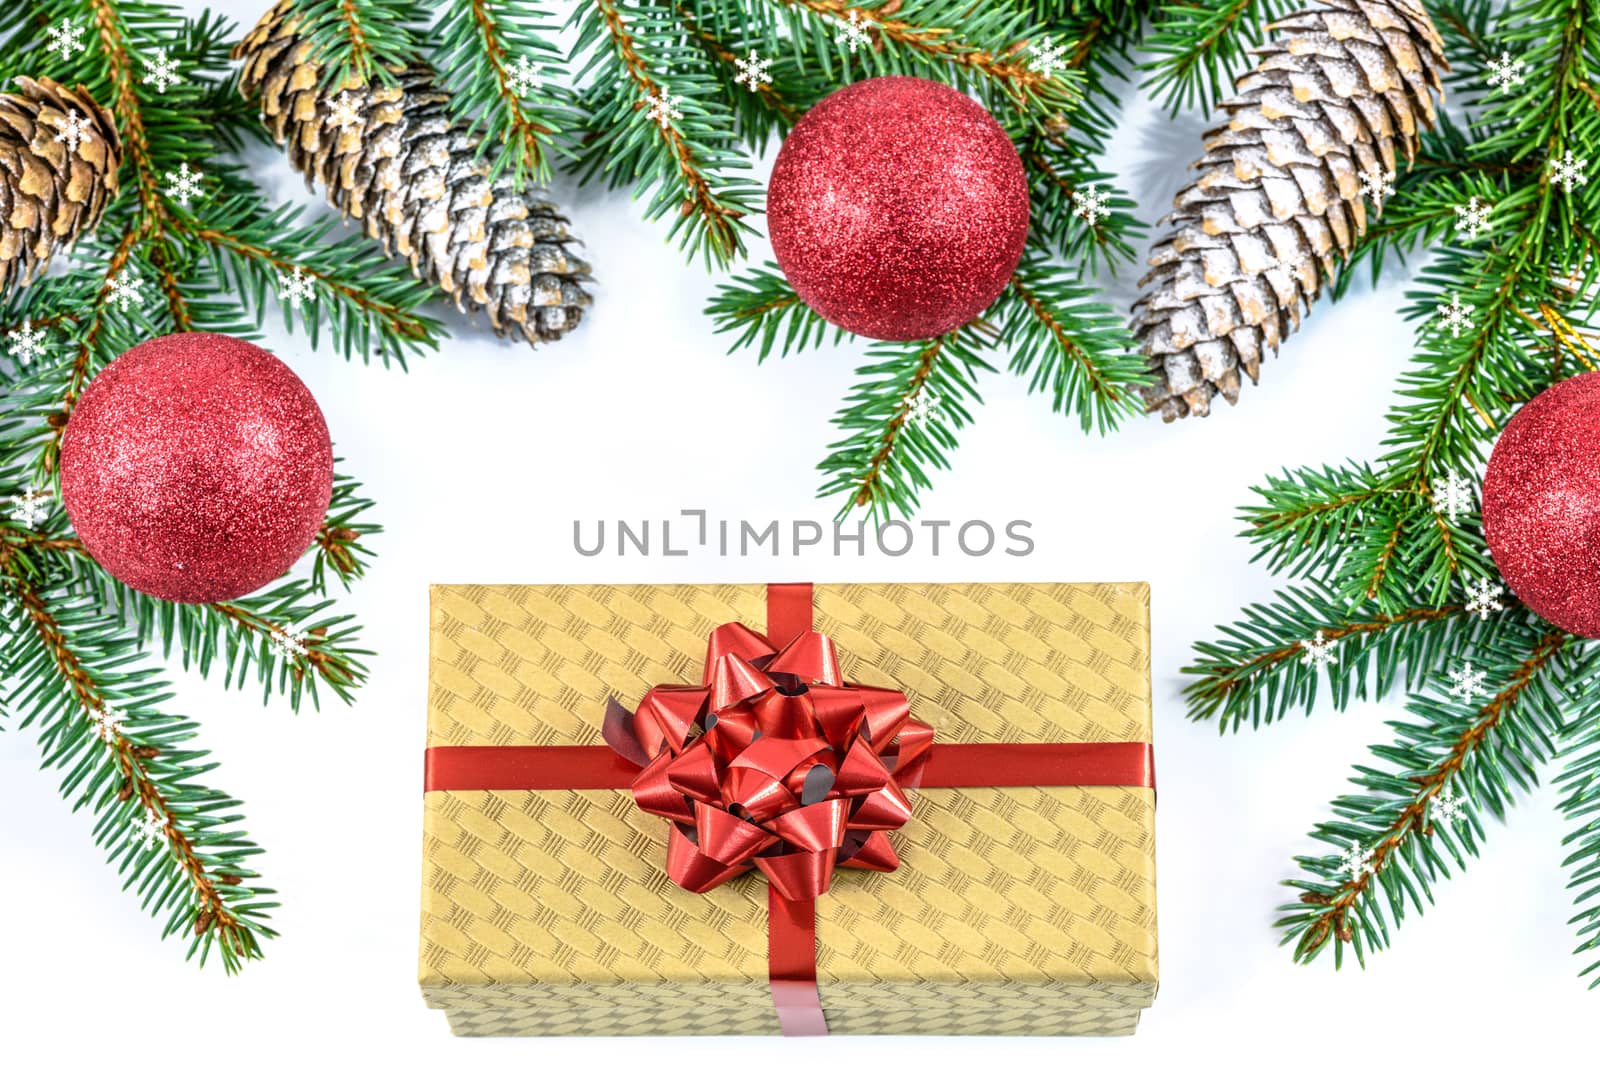 Overhead shot on branches of Siberian spruce and elegant cardboard box decorated with a red ribbon isolated on a white background